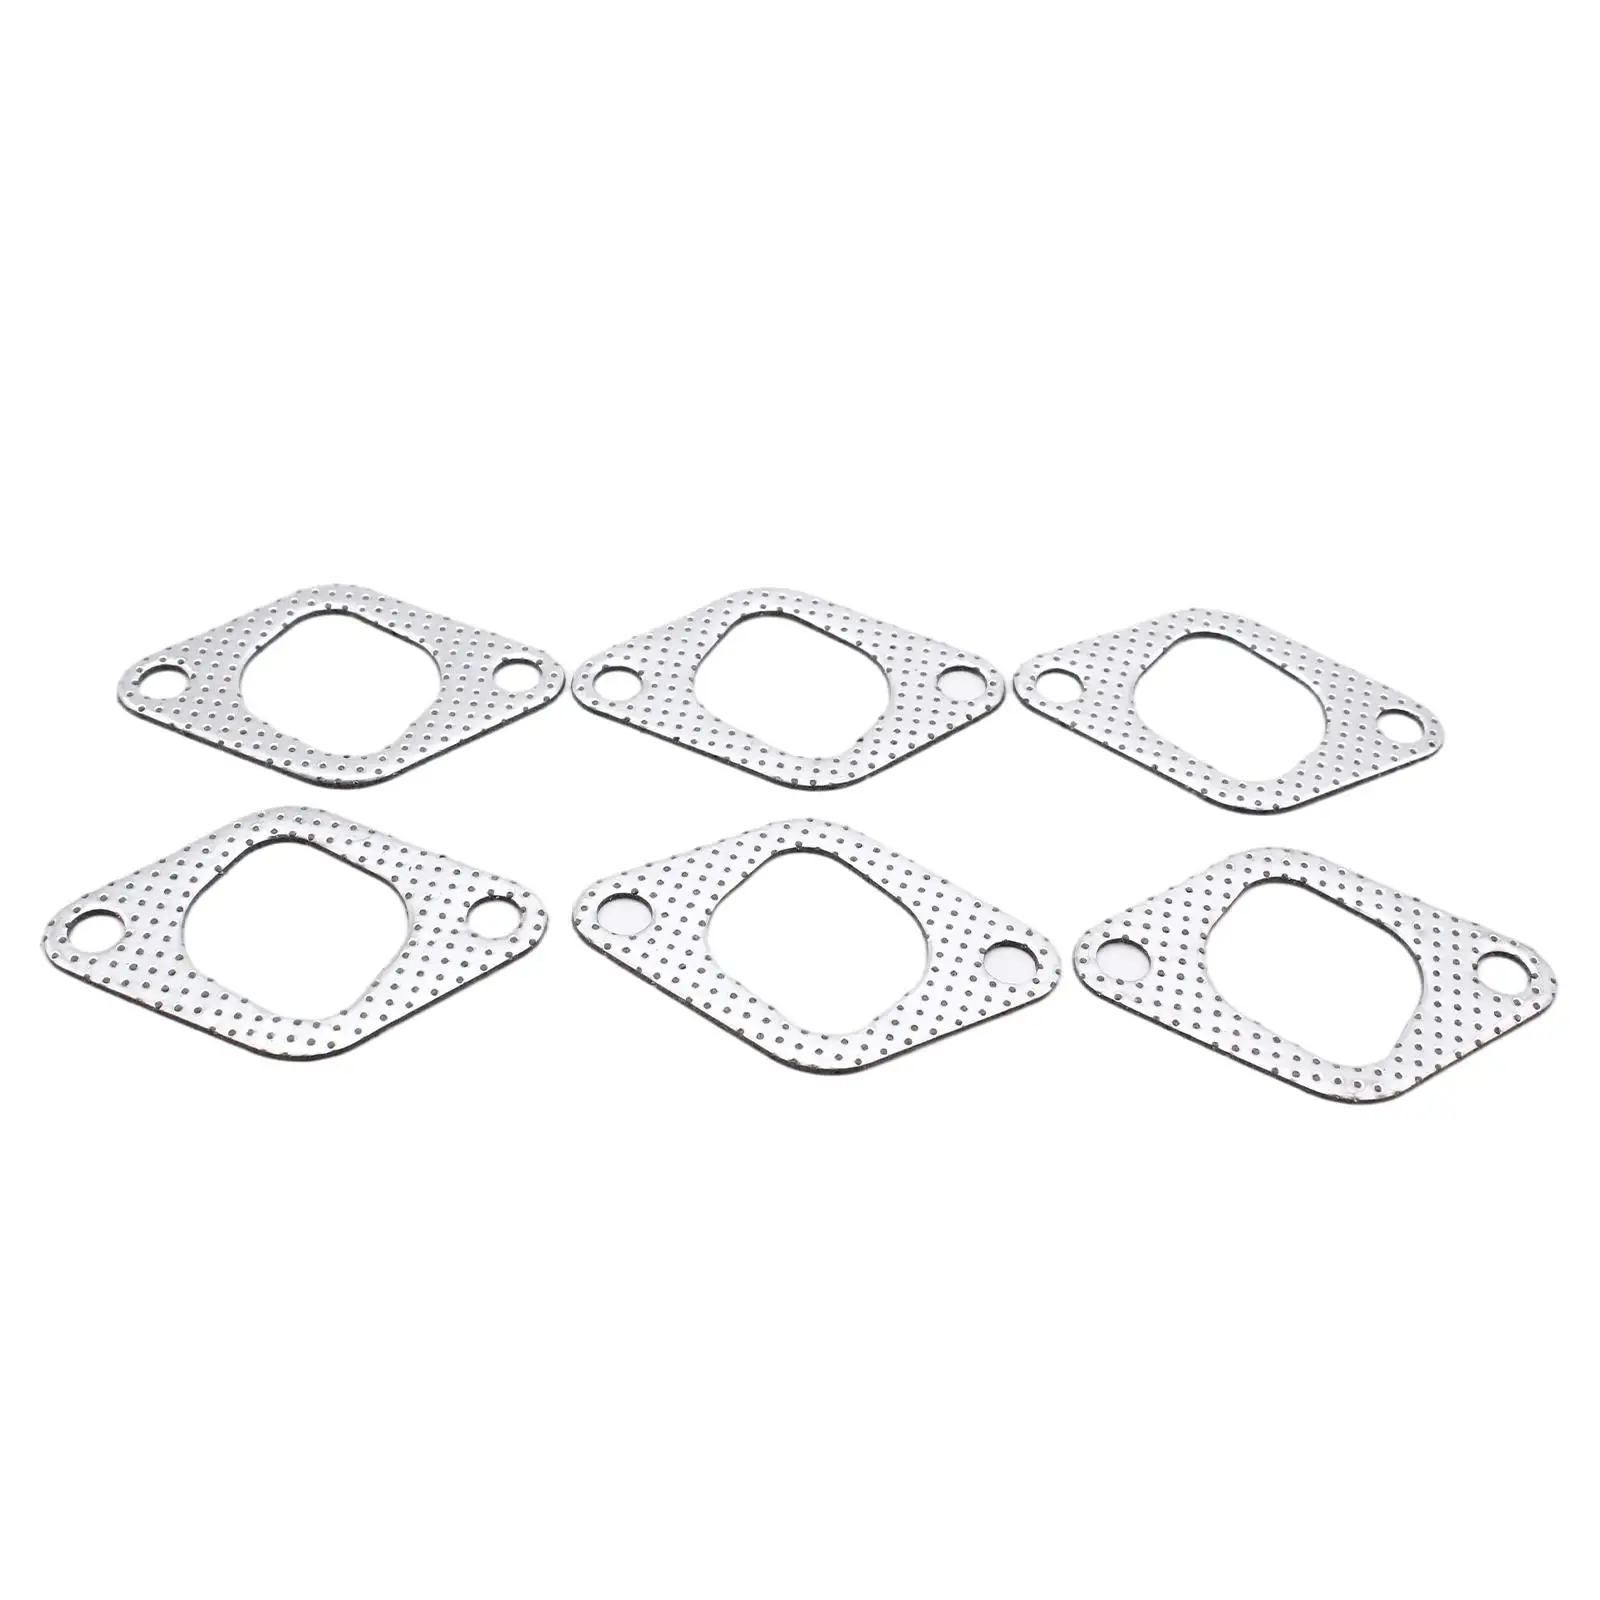 Extractor/Exhaust Manifold Gasket Set Replace for GQ Gu Patrol